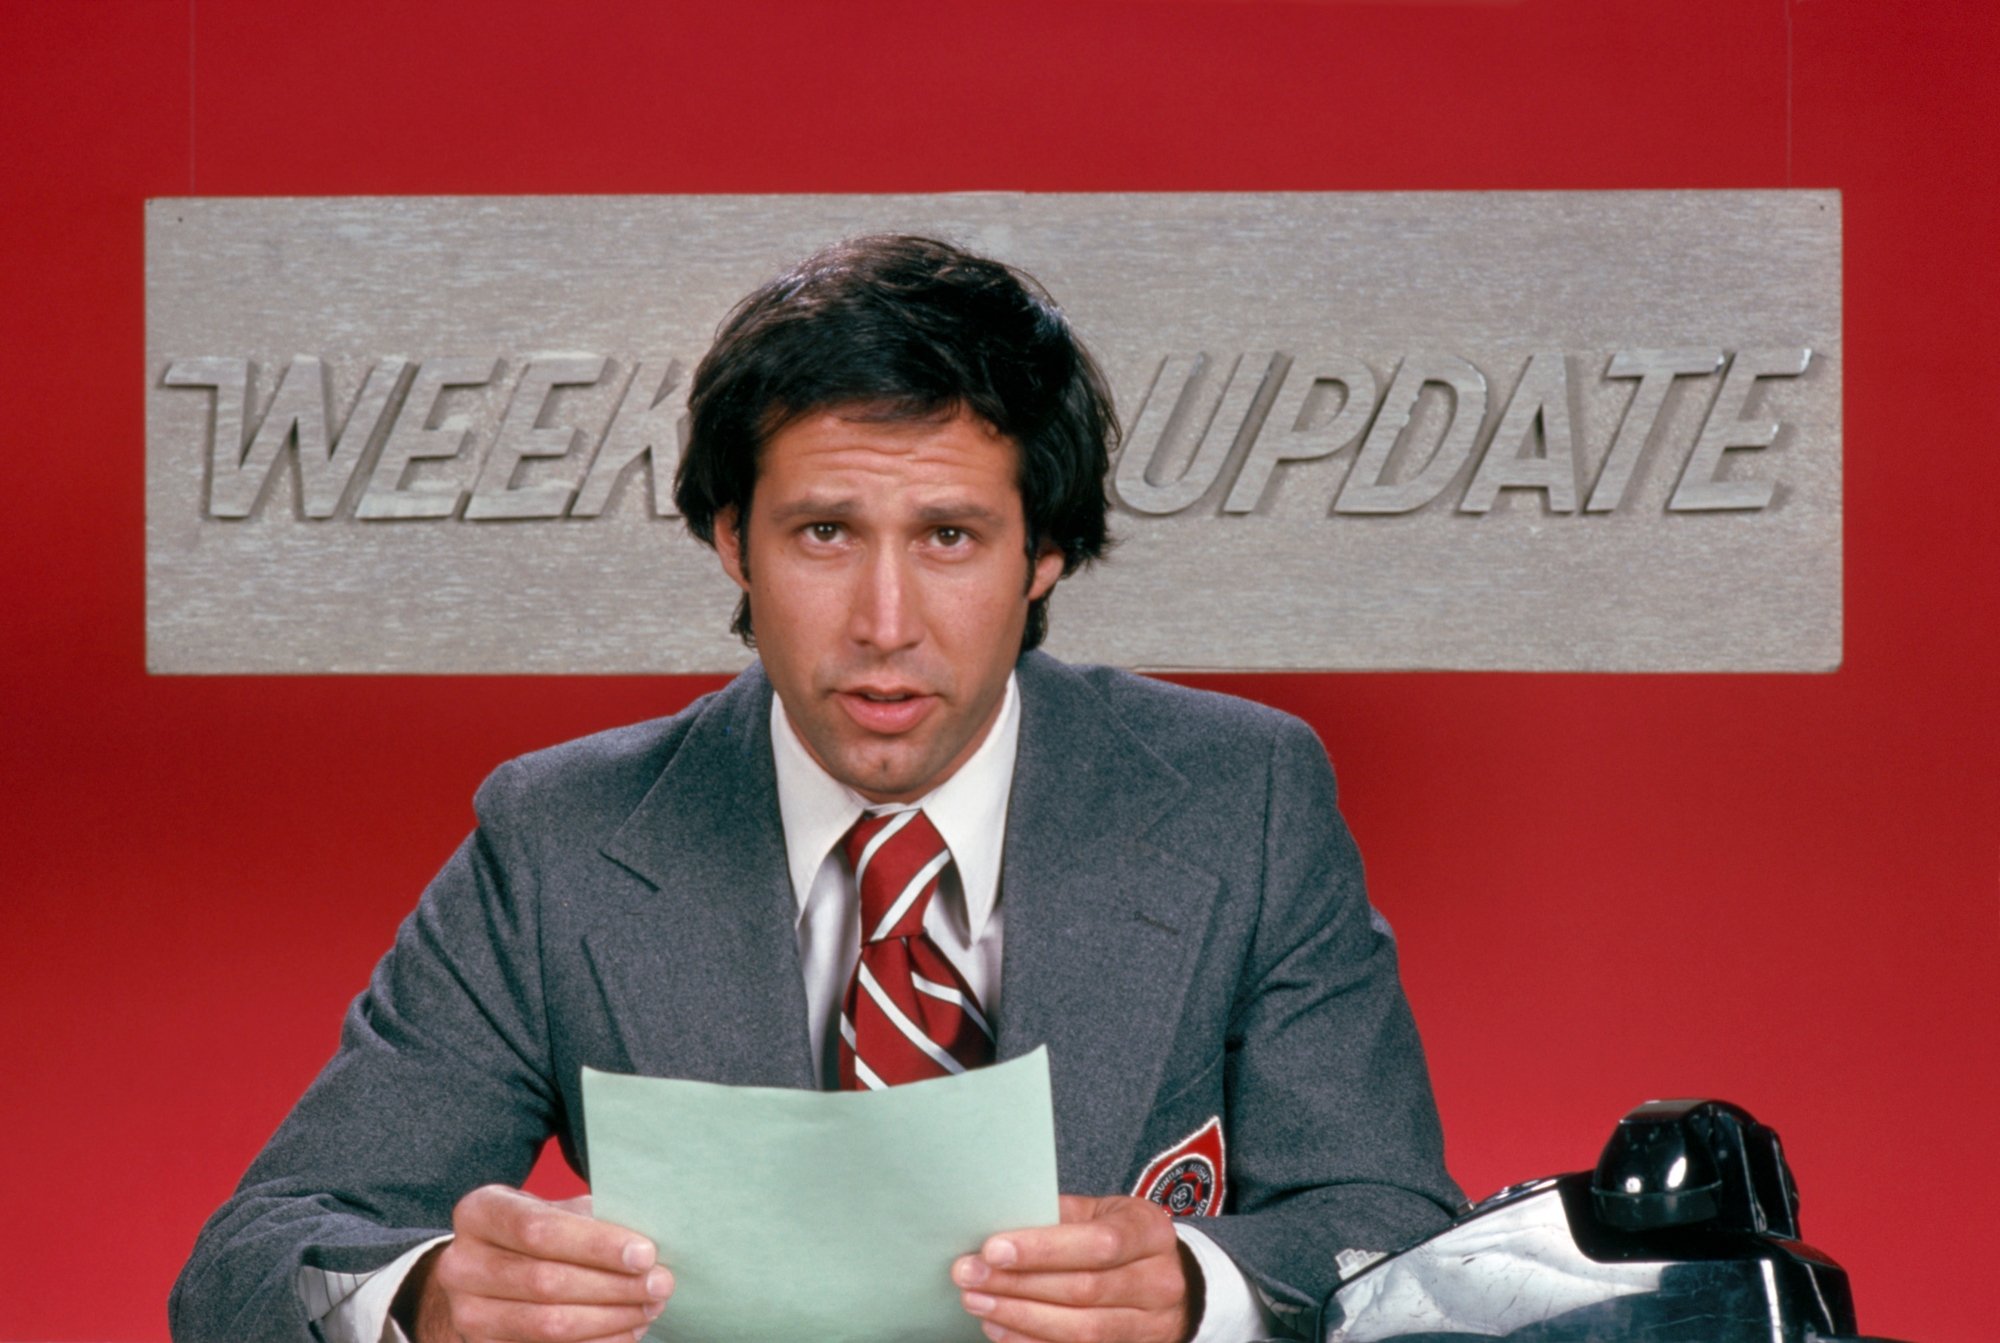 'Saturday Night Live' Chevy Chase on 'Weekend Update' wearing a suit and tie while holding a piece of paper. He's sitting in front of a red background with the 'Weekend Update' logo behind him.